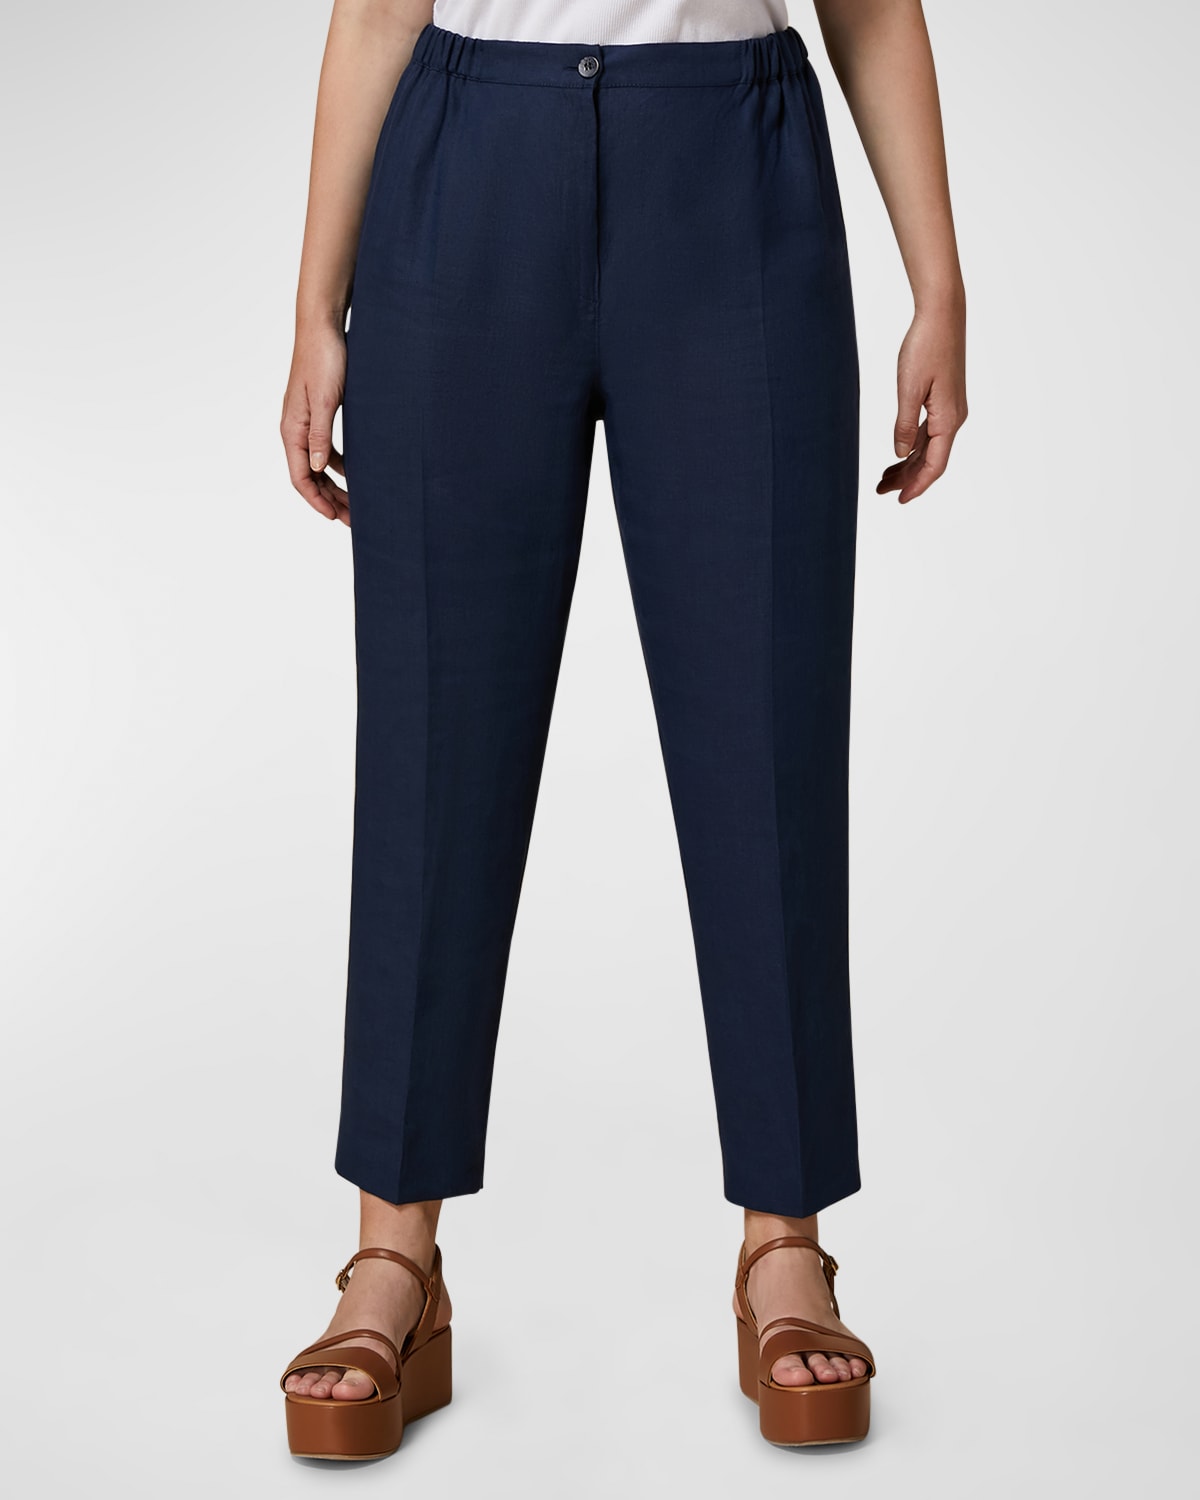 Plus Size Respiro Cropped Linen Trousers